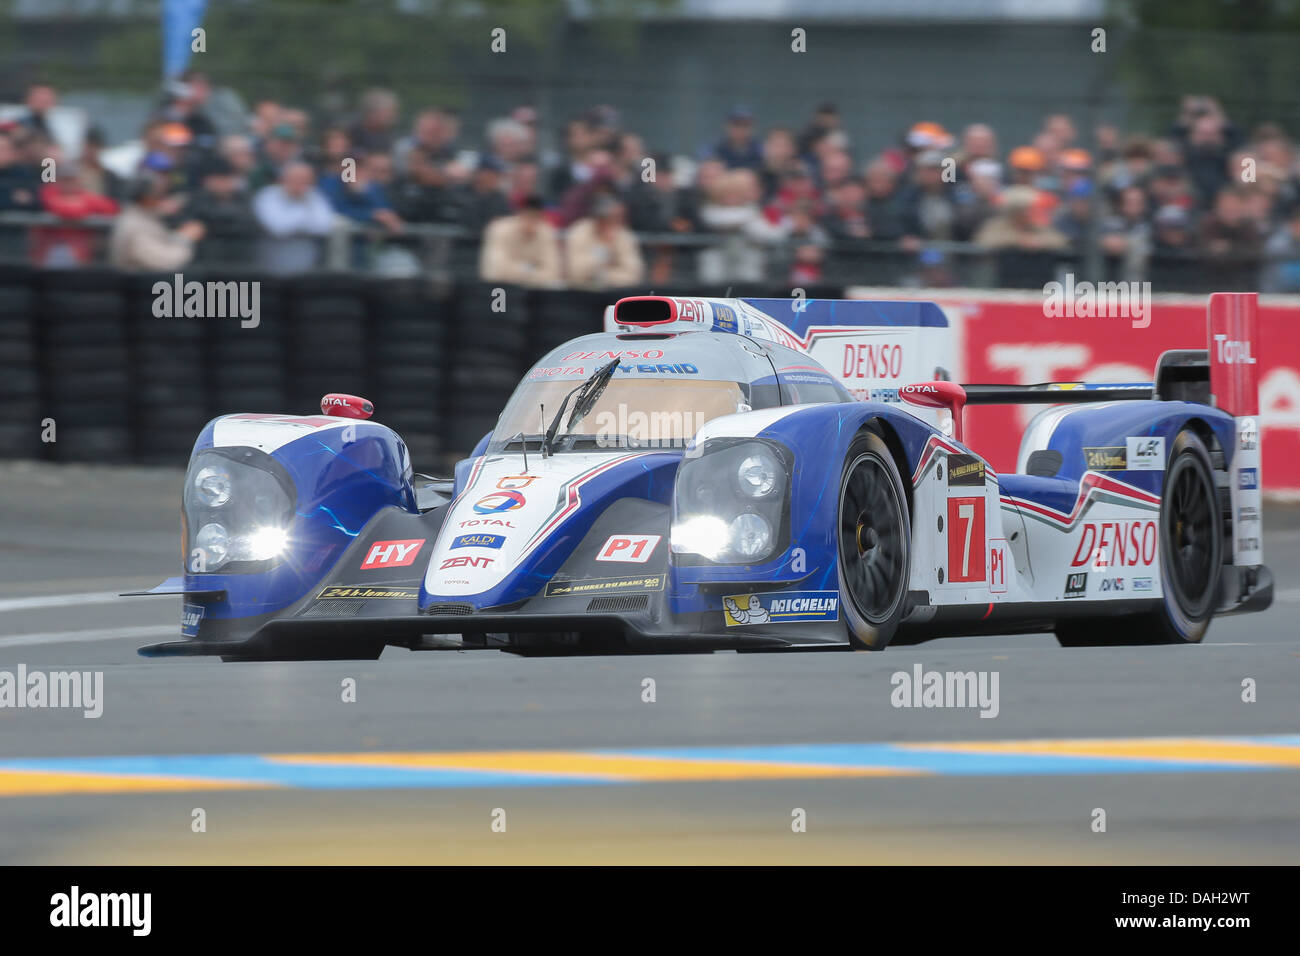 LE MANS, FRANCE - JUNE 23 Toyota #7 competes in the 24 hours of Le Mans 2013 Stock Photo